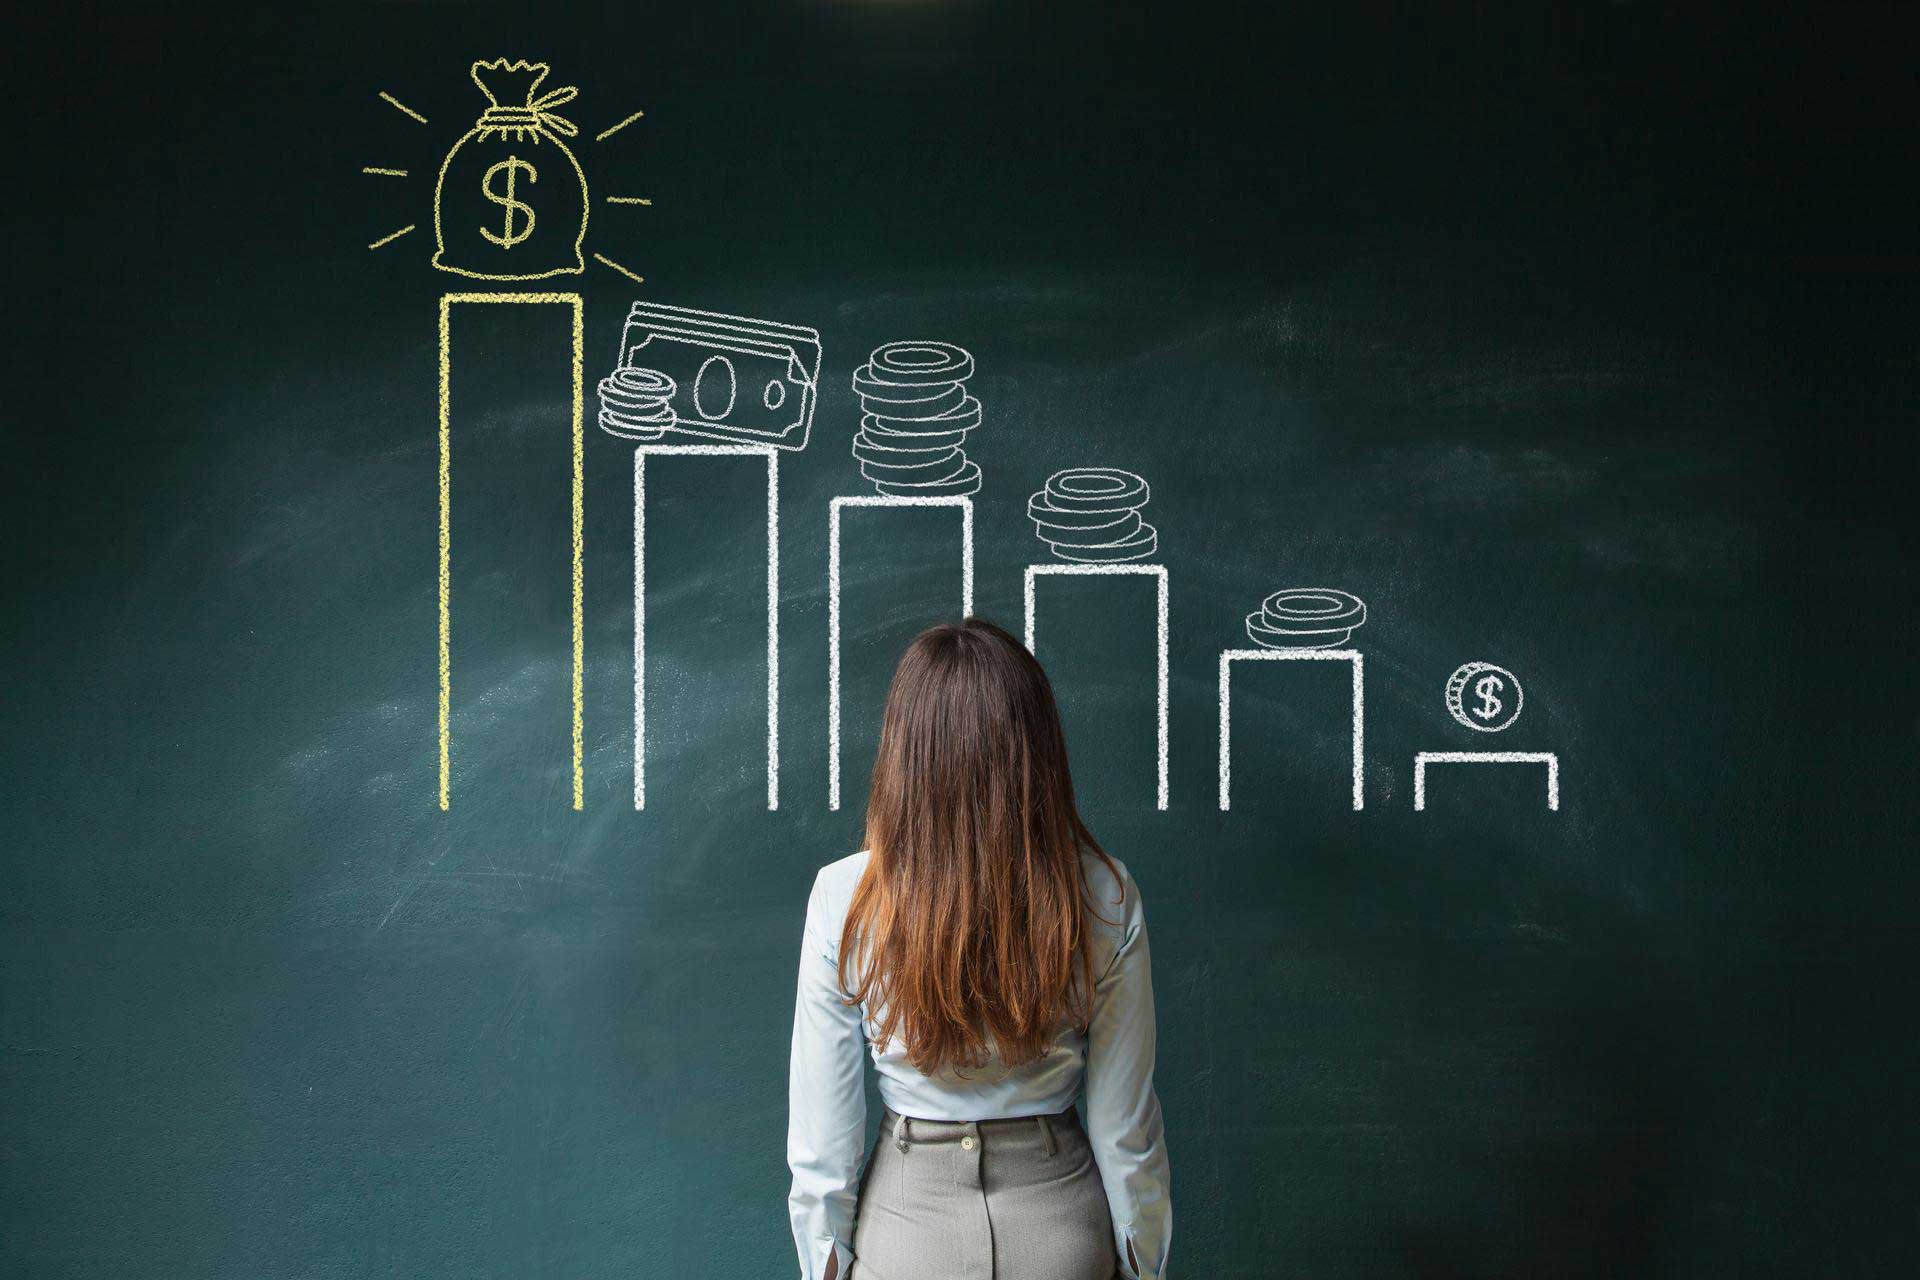 A woman stands in front of a blackboard with financial symbols painted on it